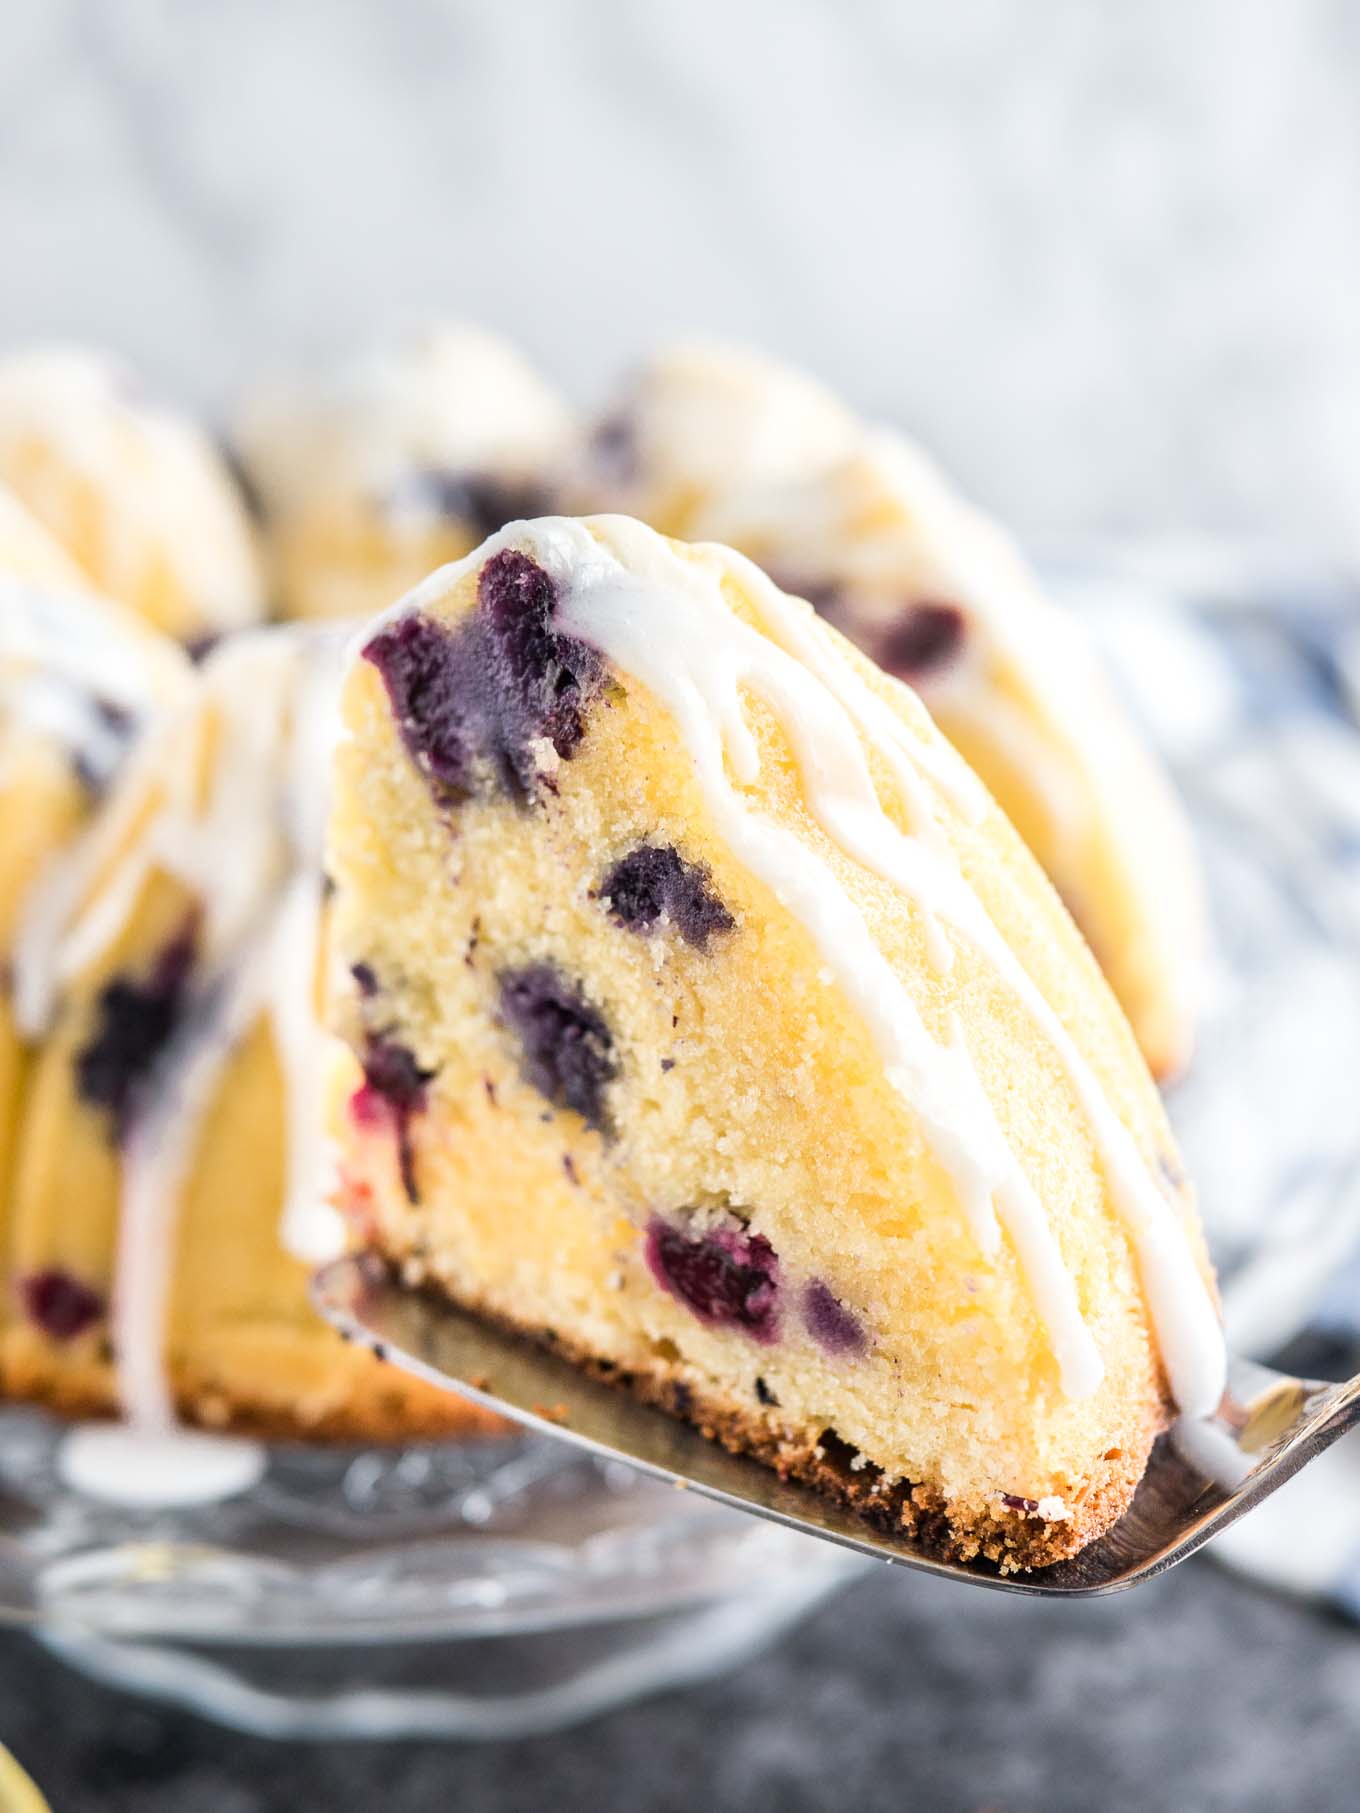 A slice of lemon blueberry bundt cake on a cake server in the foreground and the rest of the cake on a glass serving platter in the background.